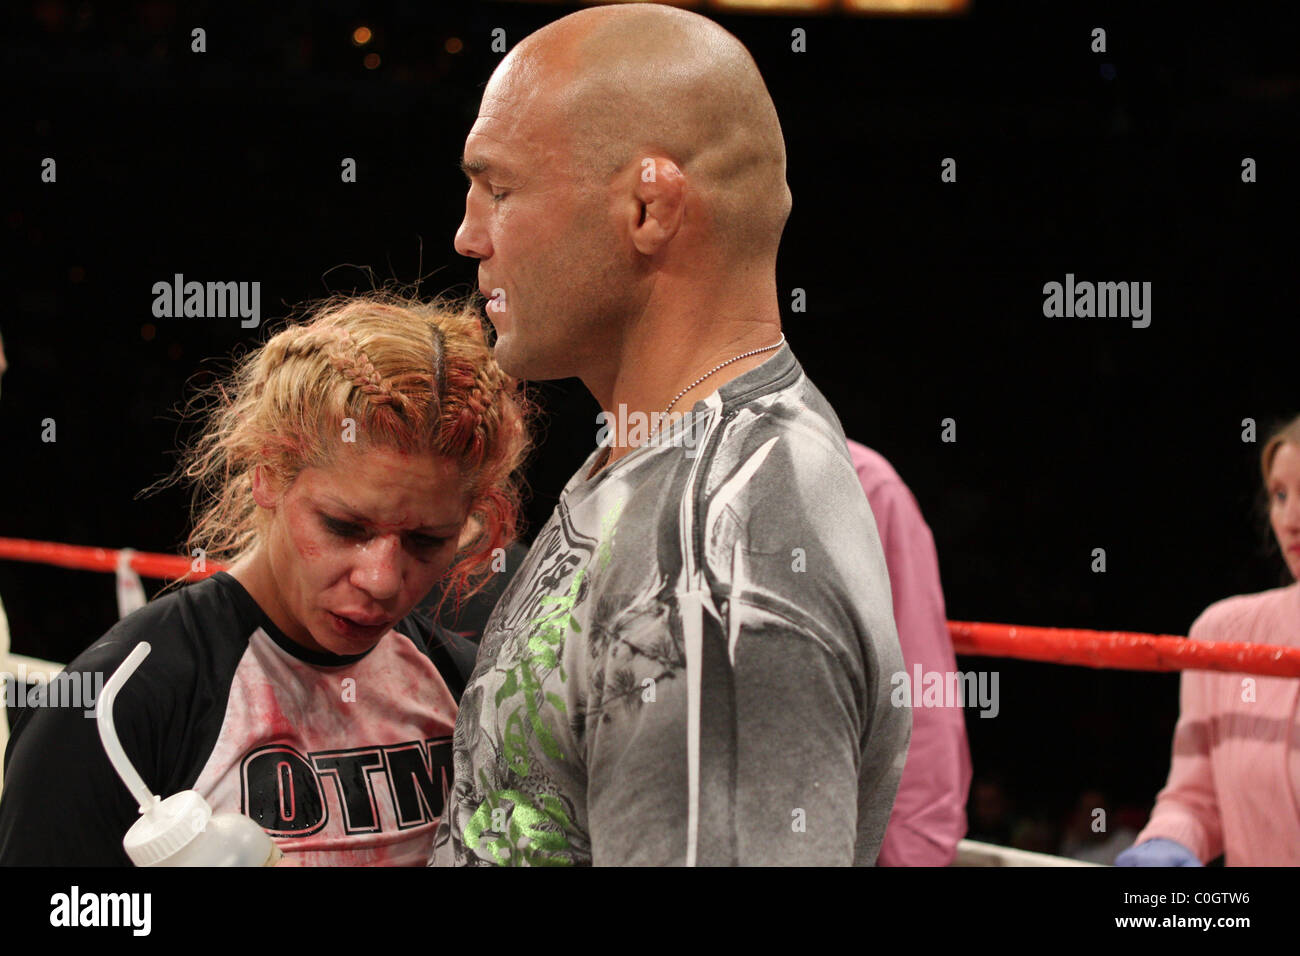 MMA fight between Kim Rose and MMA legend Randy Couture's wife Kimberly in her debut fight at the Thomas and Mack. Kim Rose won Stock Photo